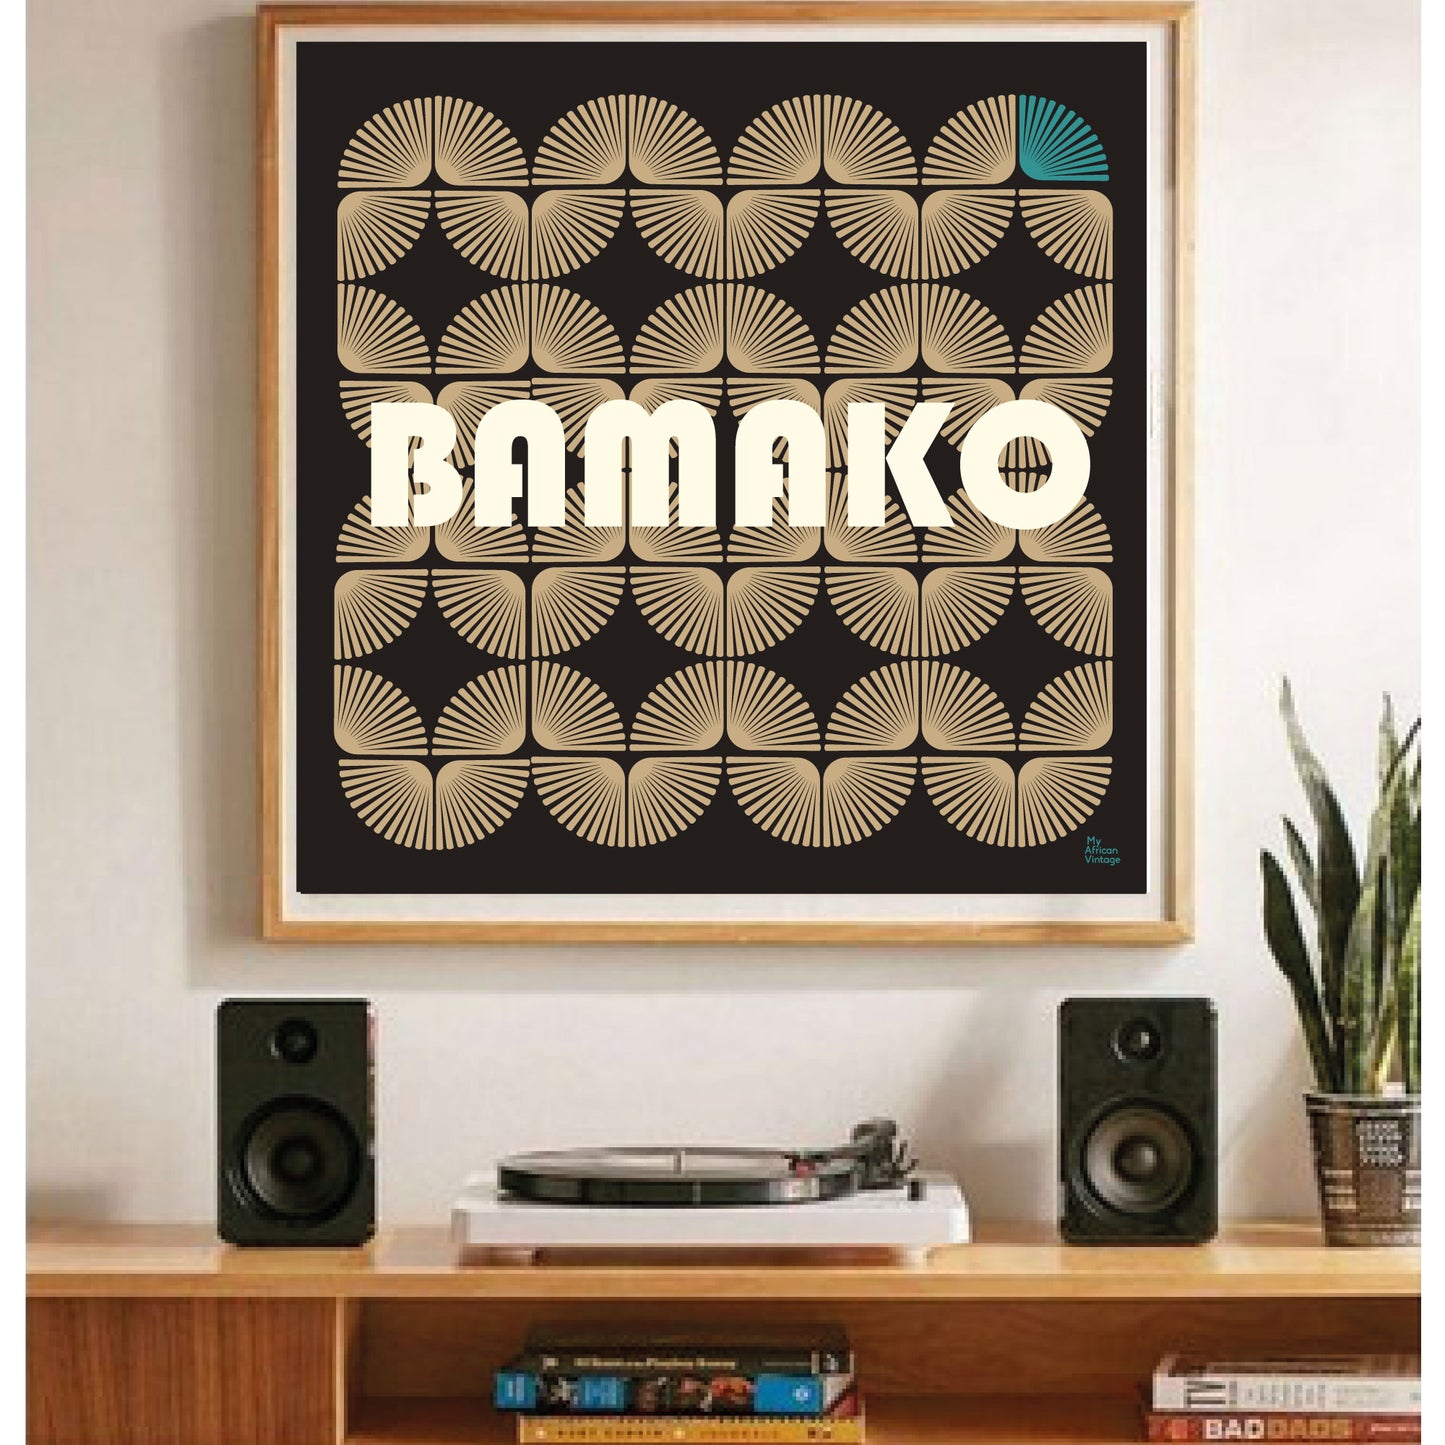 Affiche style rétro "Bamako" - collection "My African Vintage"